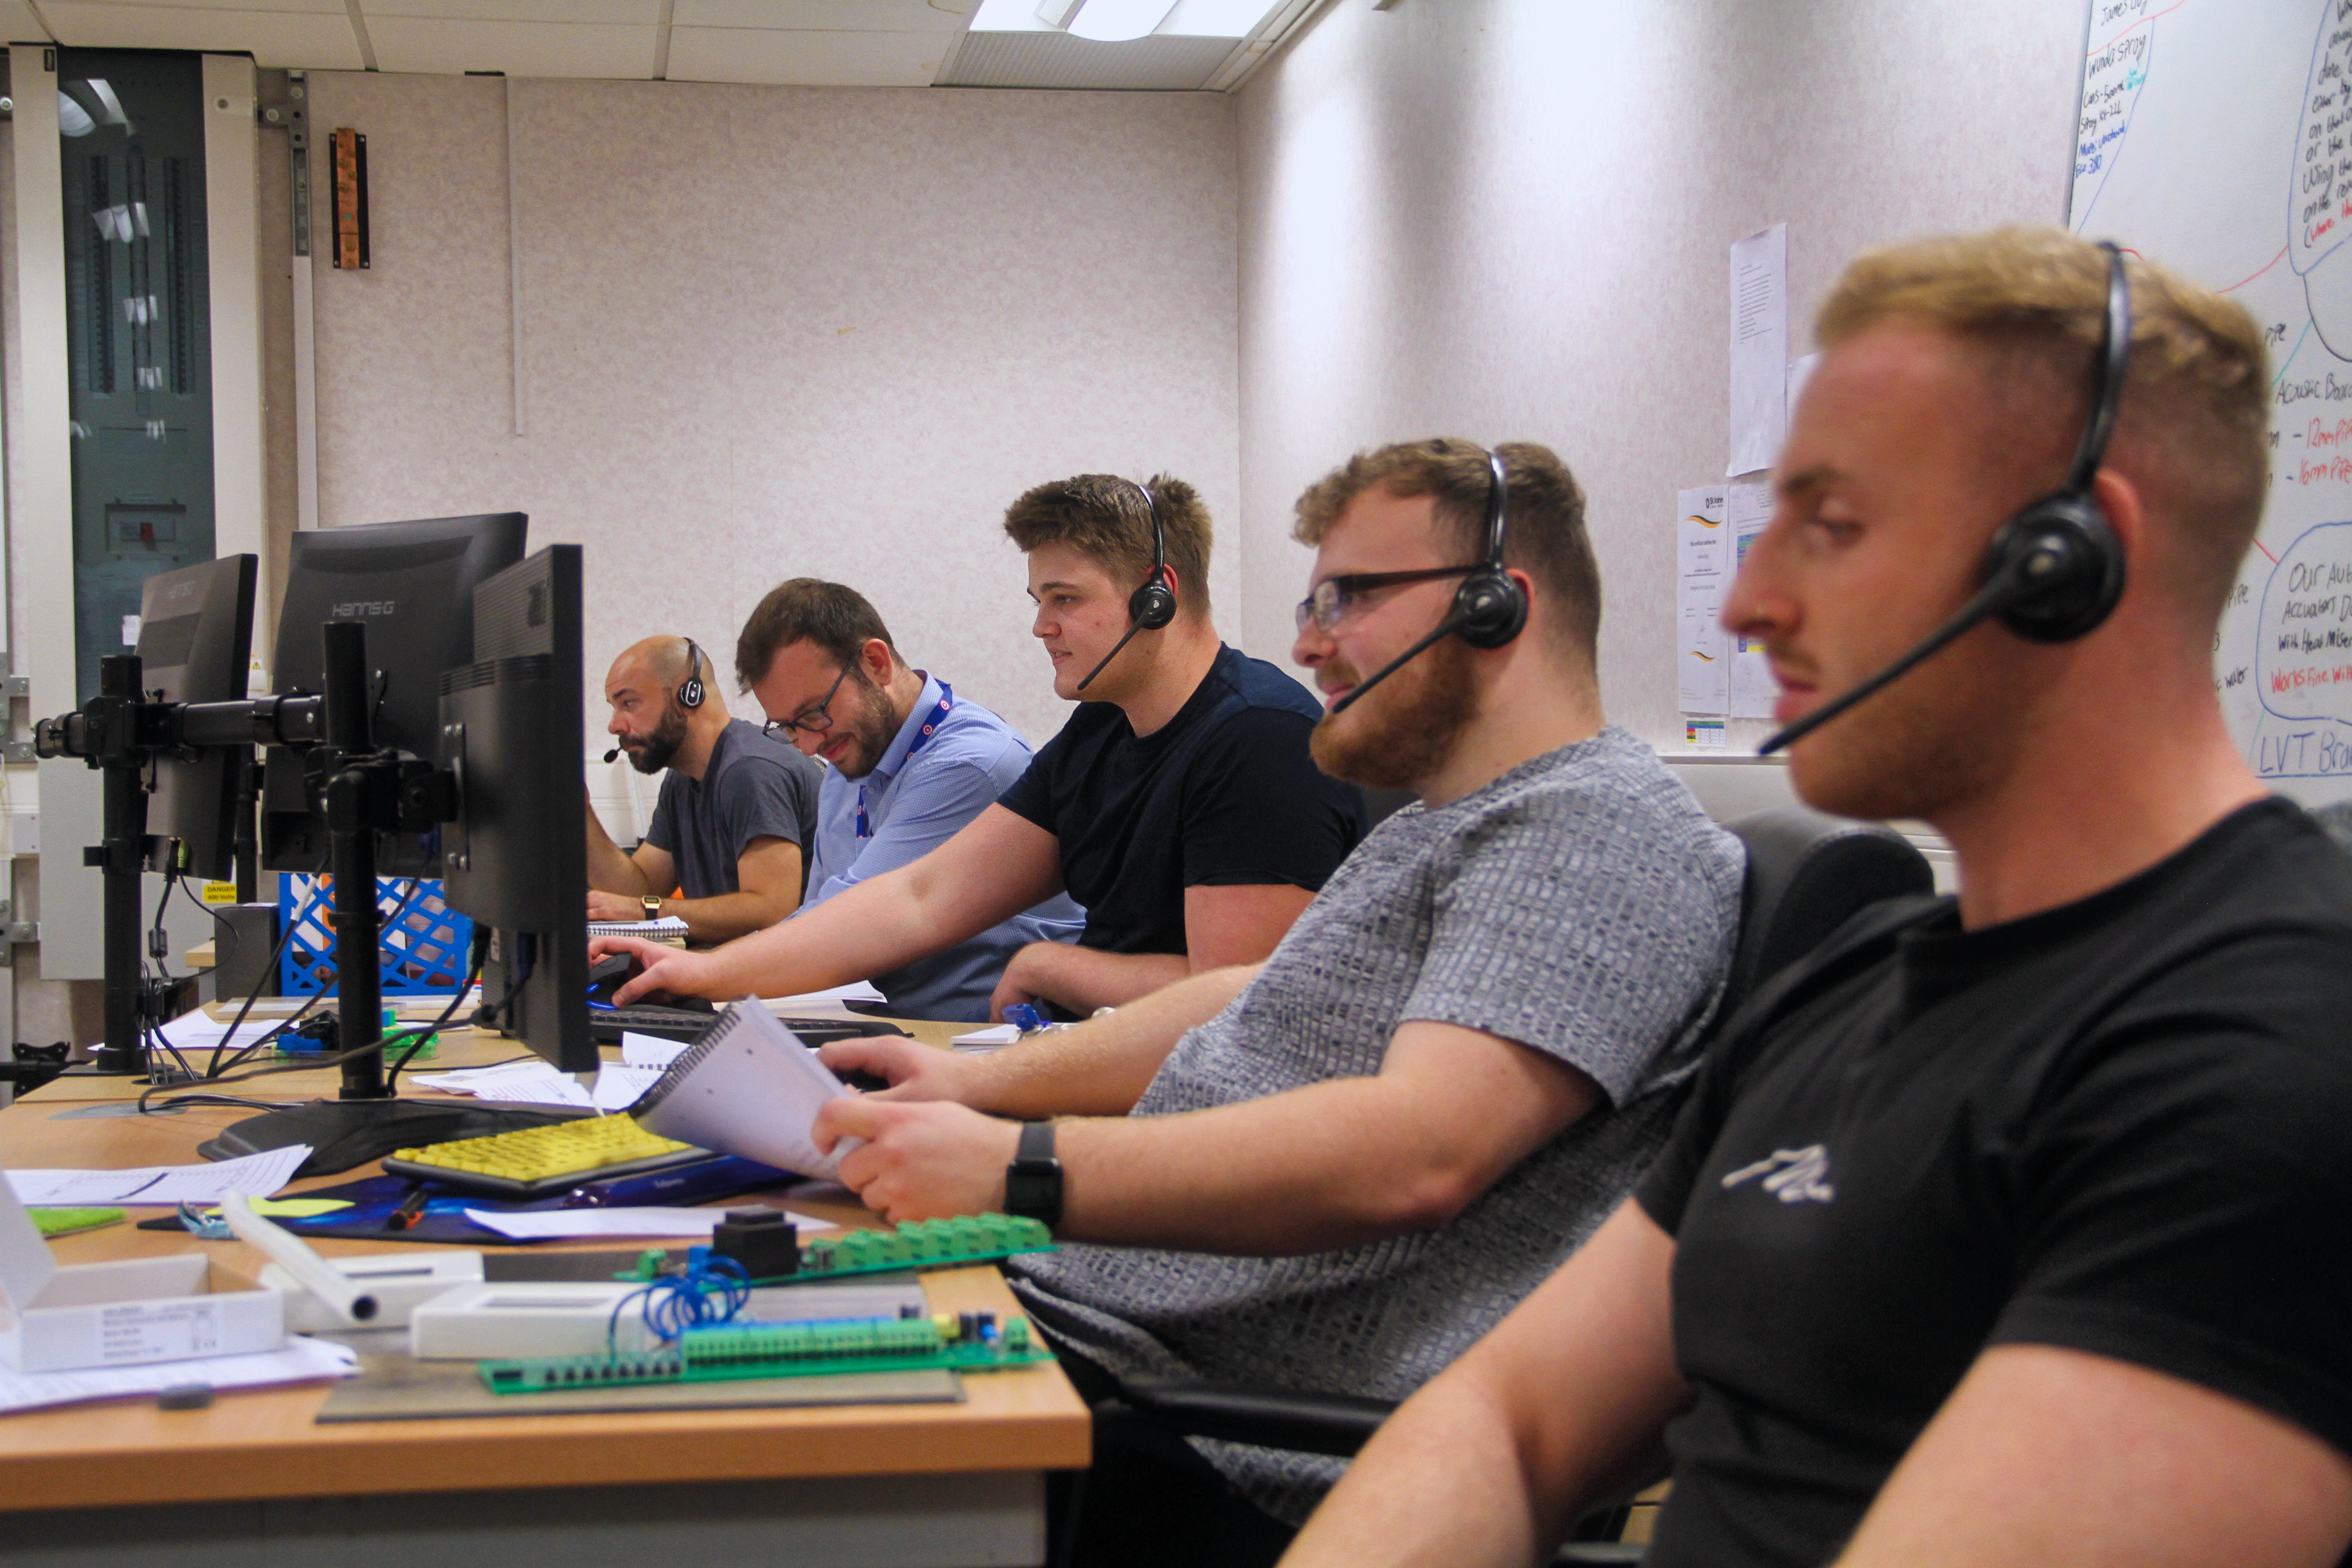 5 men sat at their desks with headsets on in front of their computers, the tech team